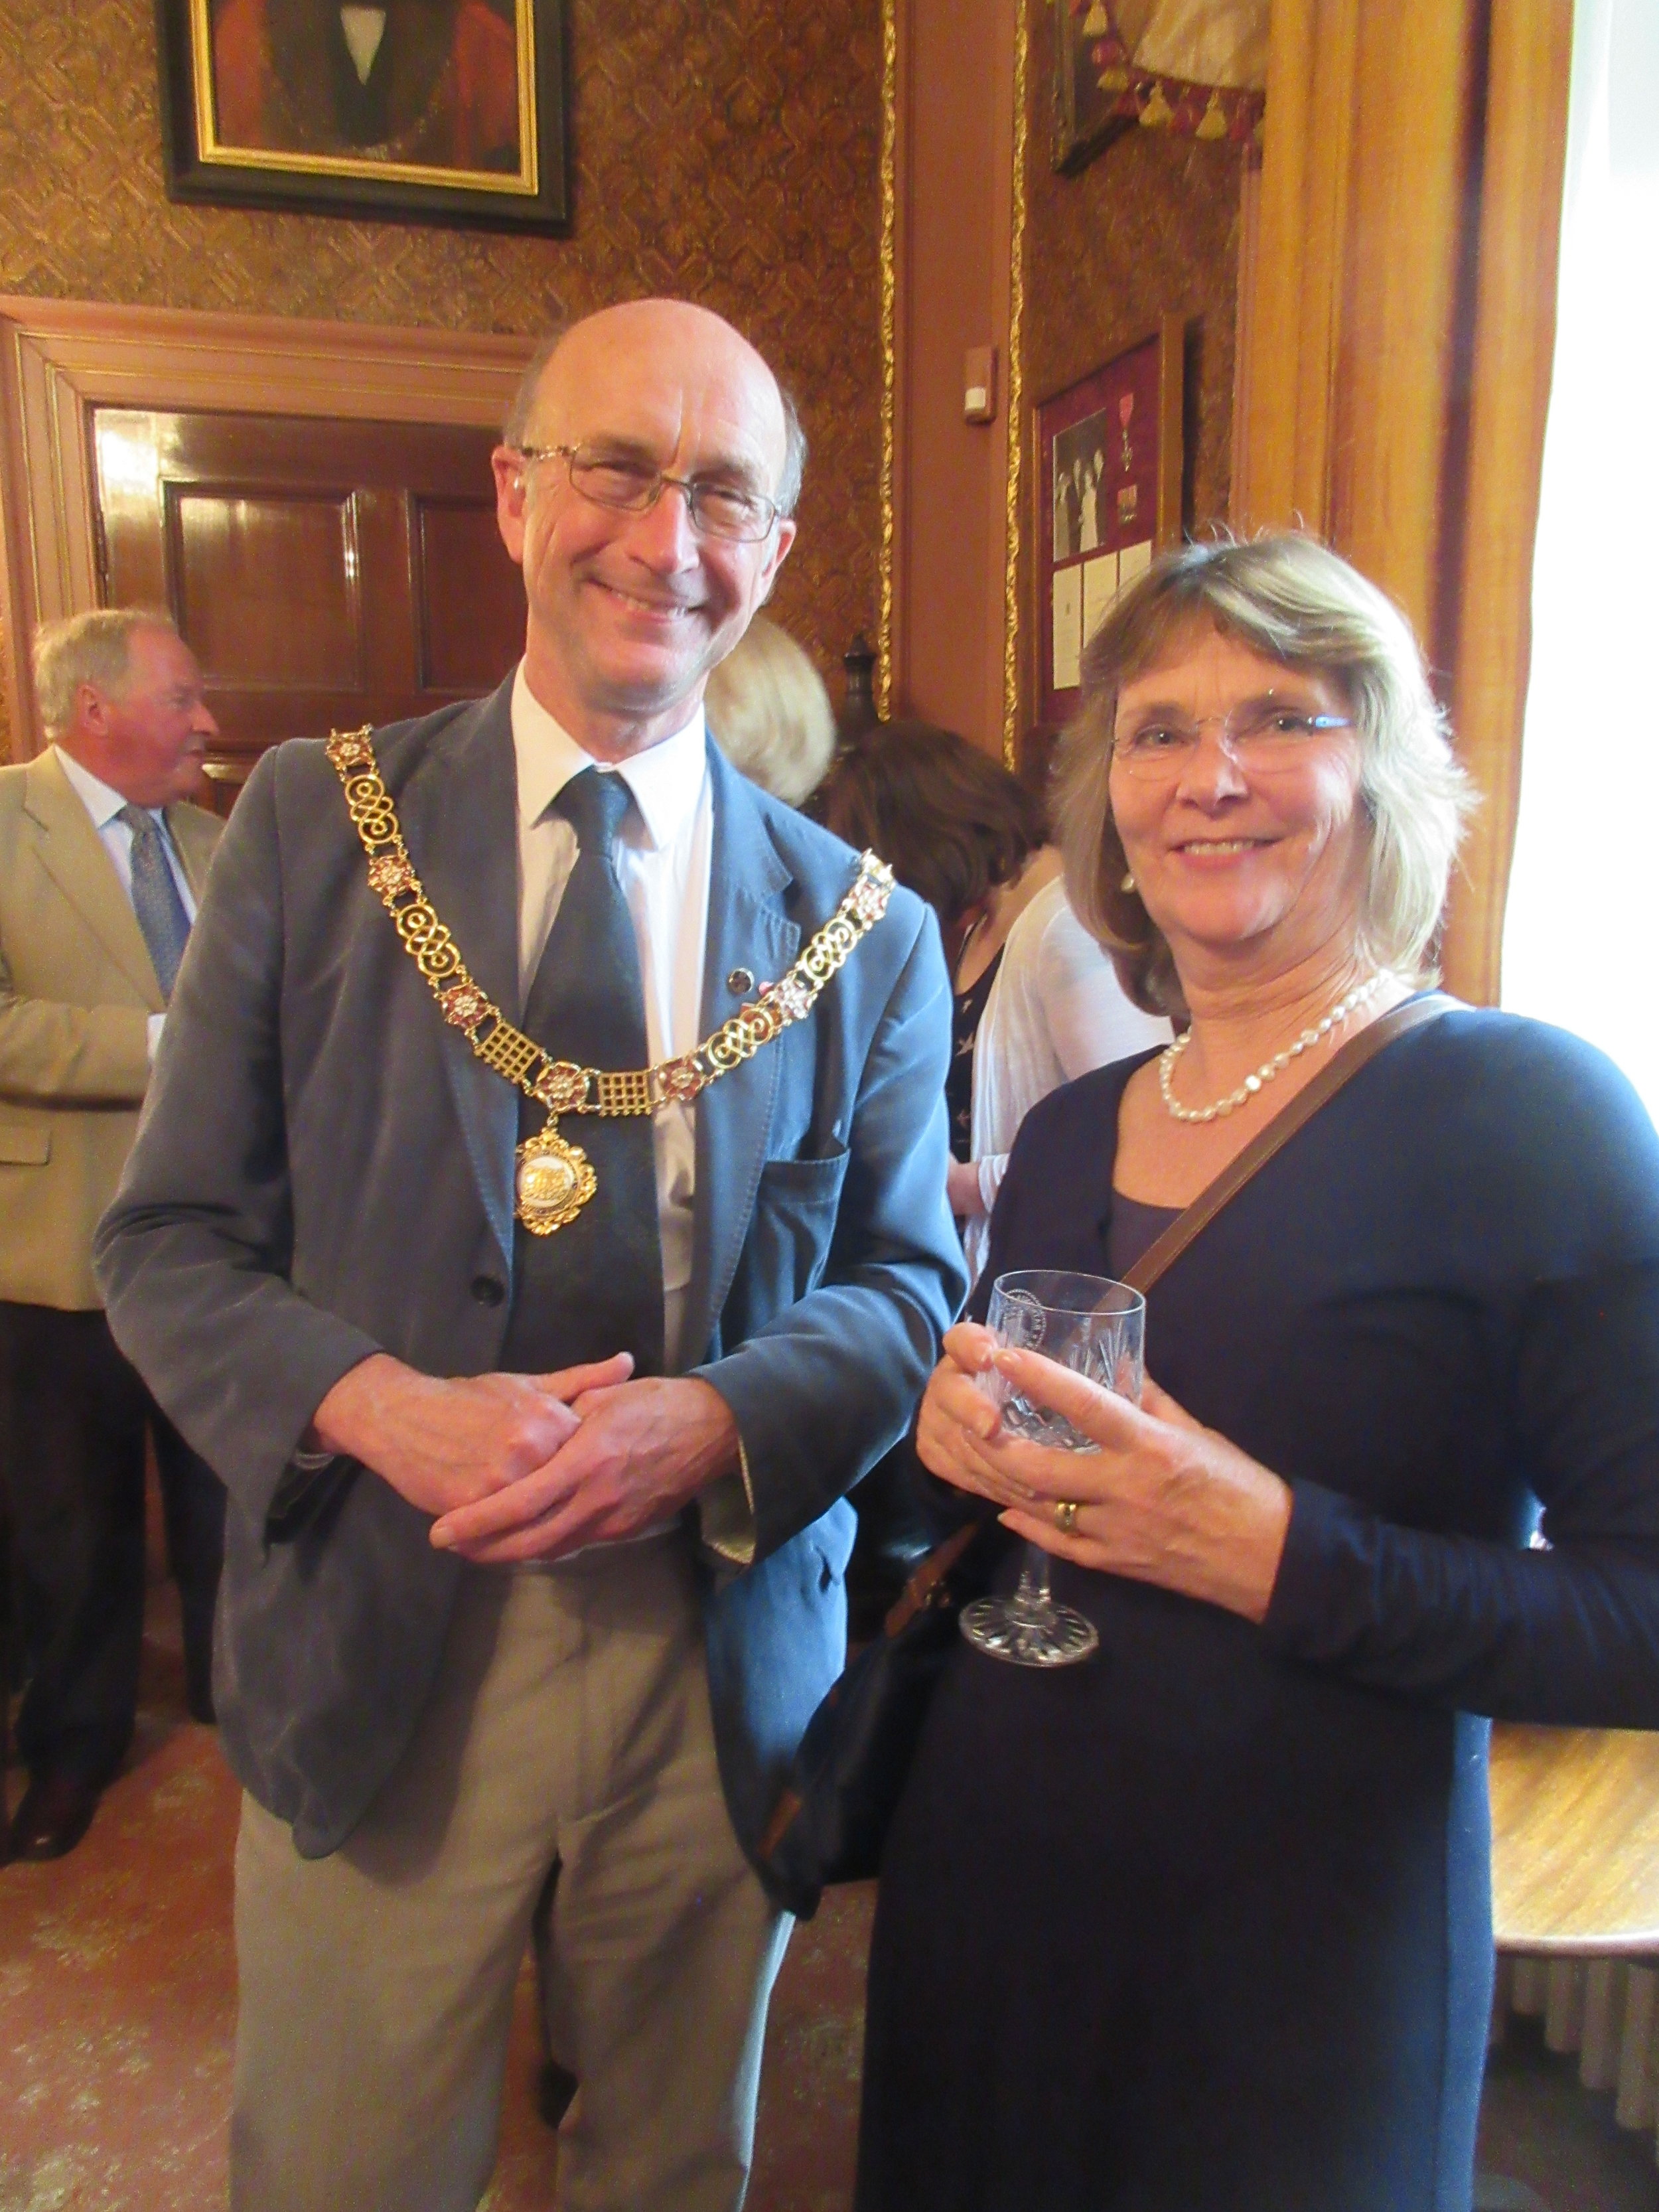 The Mayor of Bath with Next Stage actor and director Alison Paine